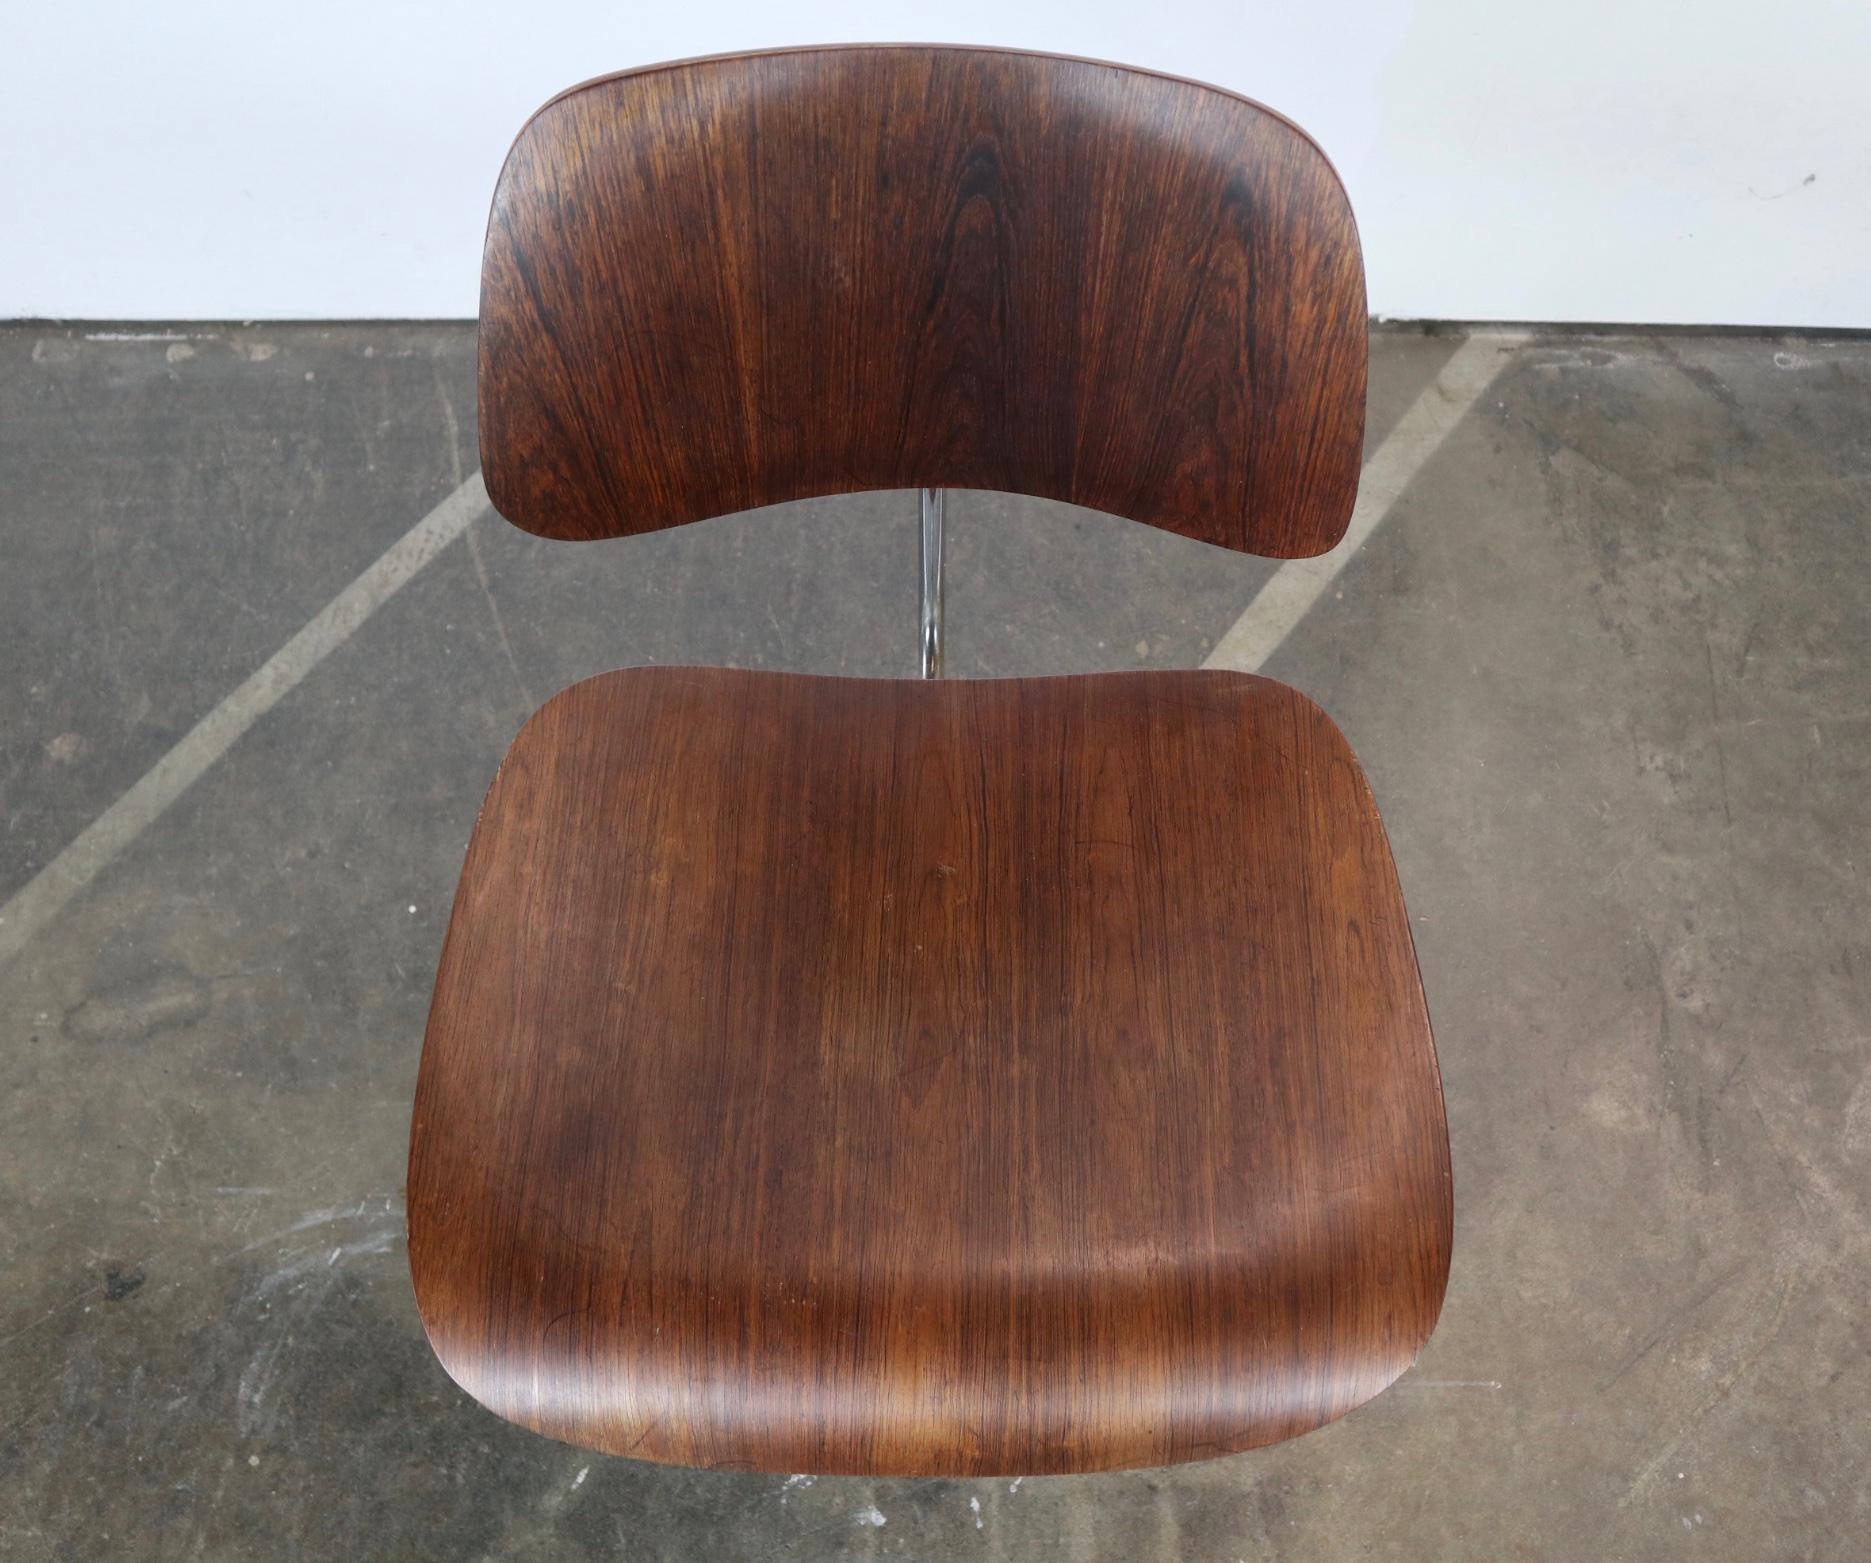 American Exquisite and Rare Rosewood Herman Miller Eames DCM Dining Chair